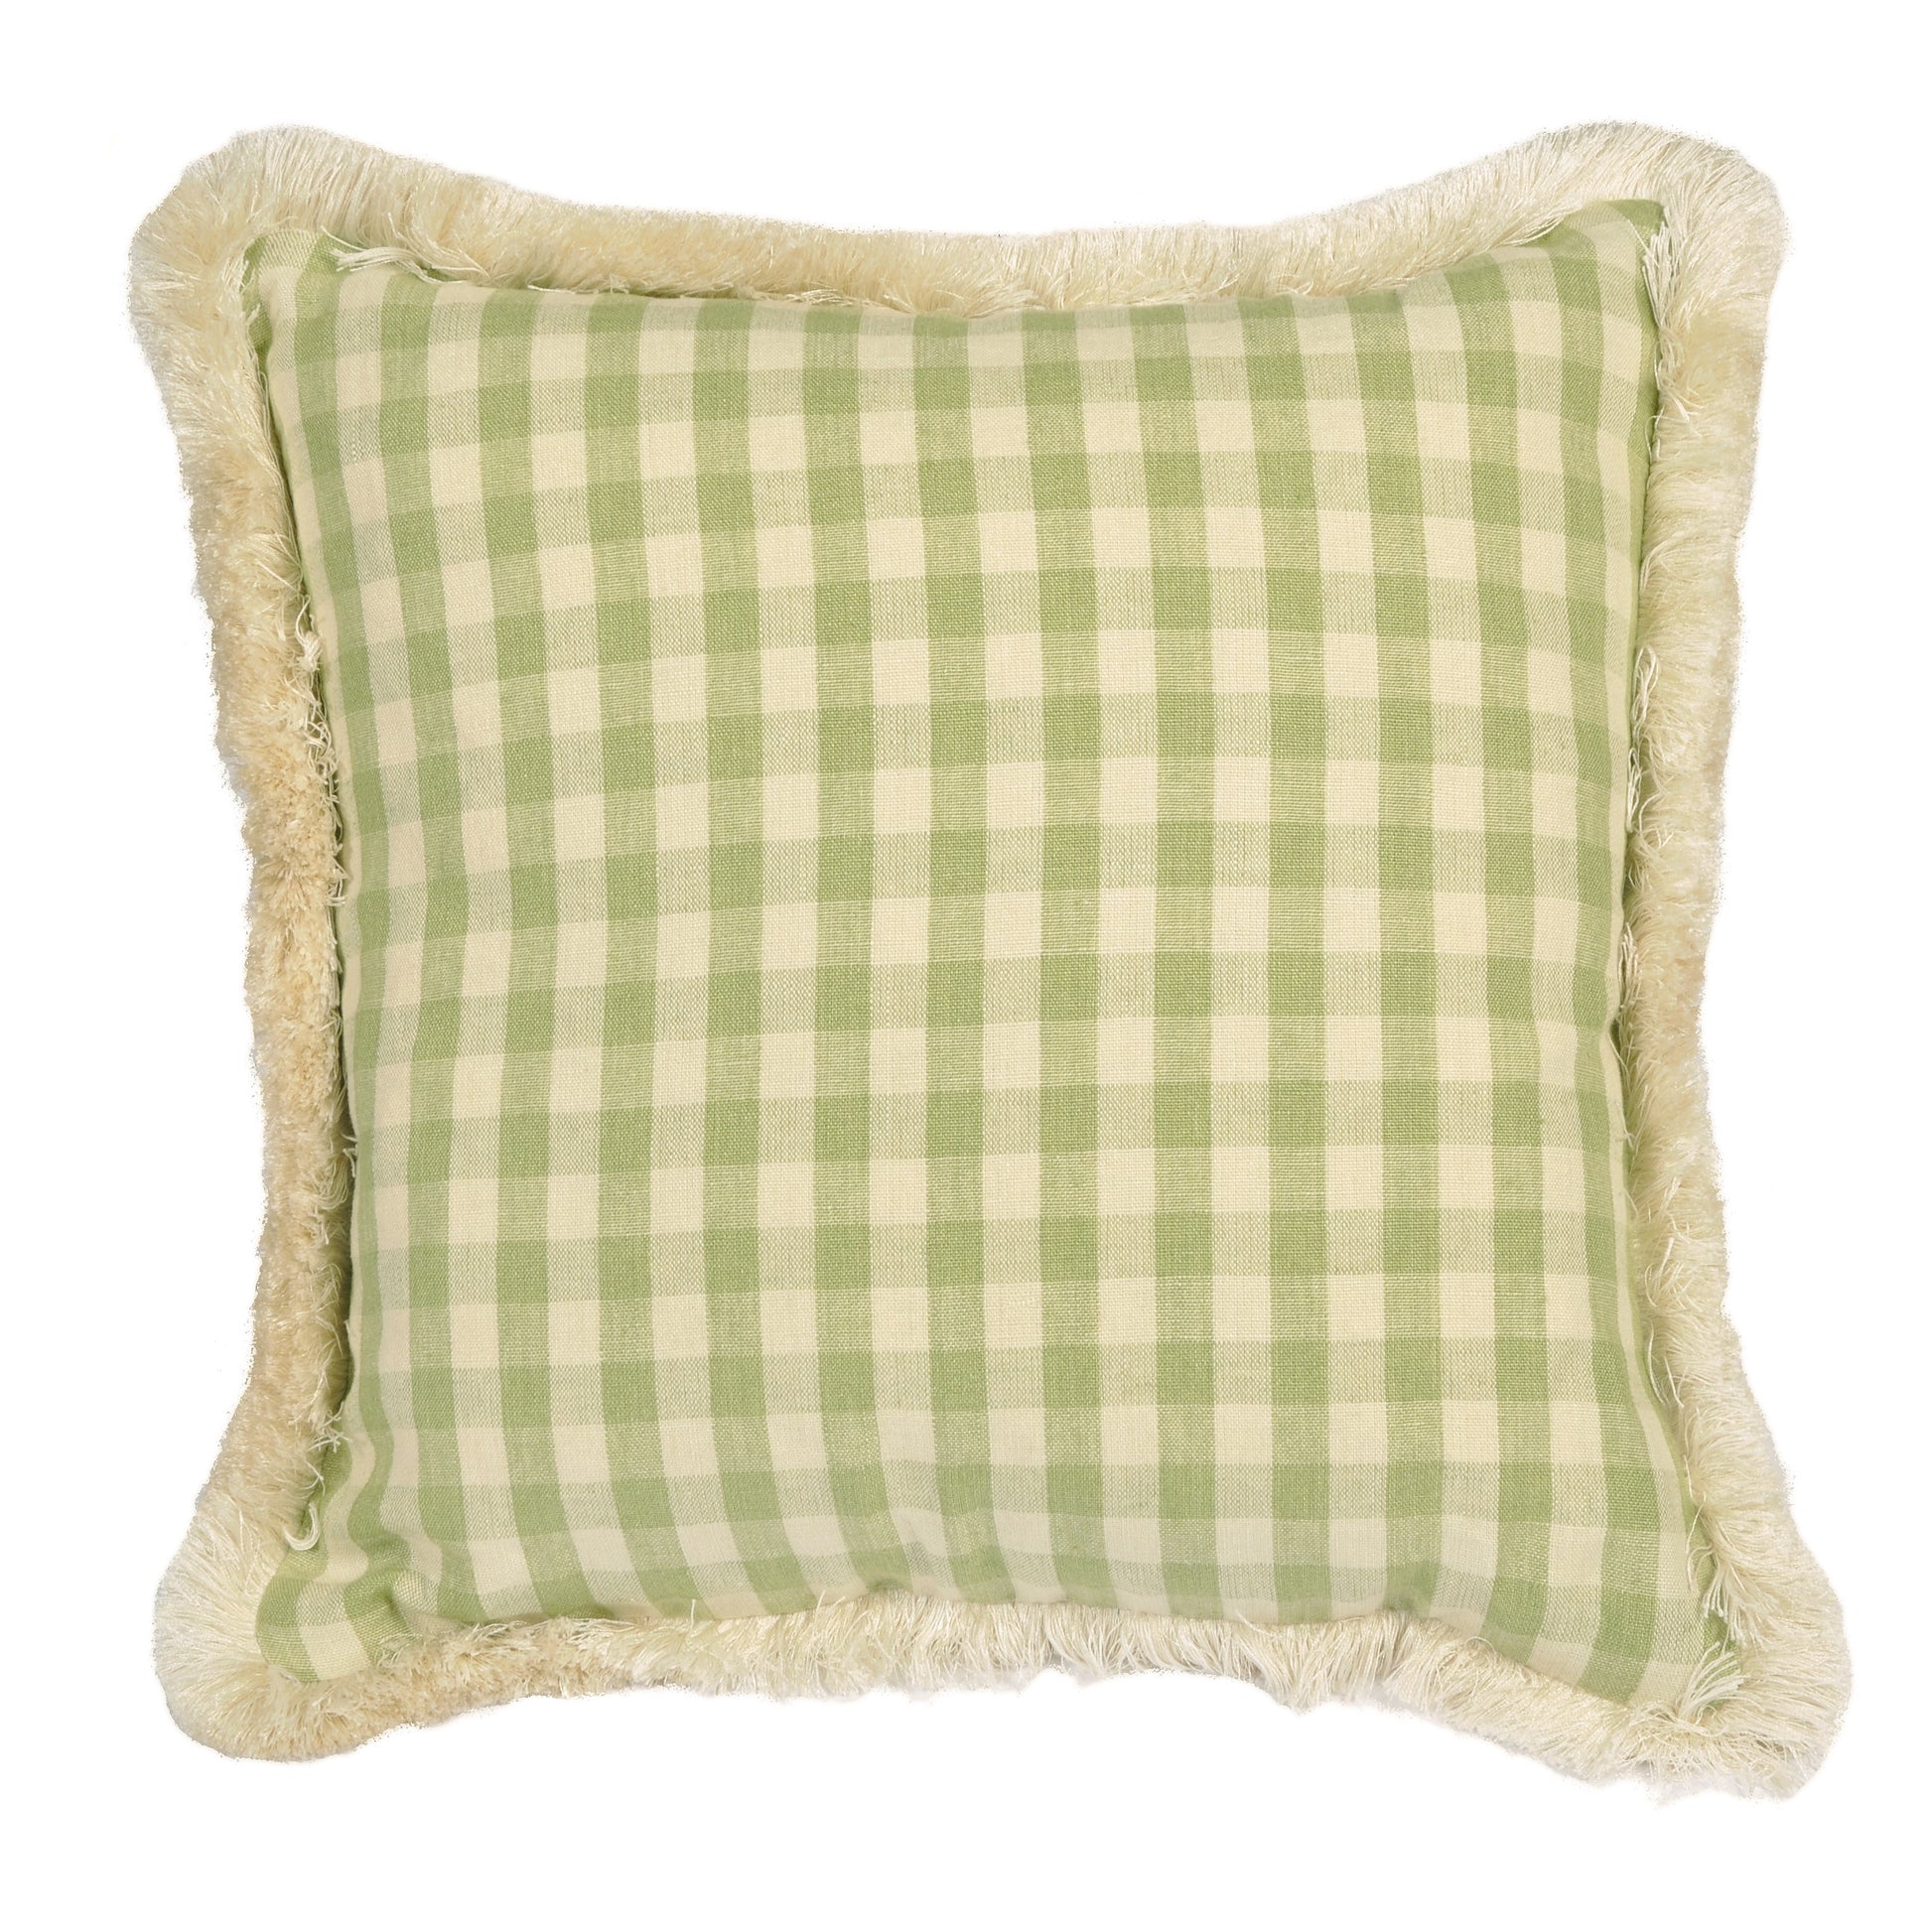 Green Gingham Square Cushion with Fringing Not specified